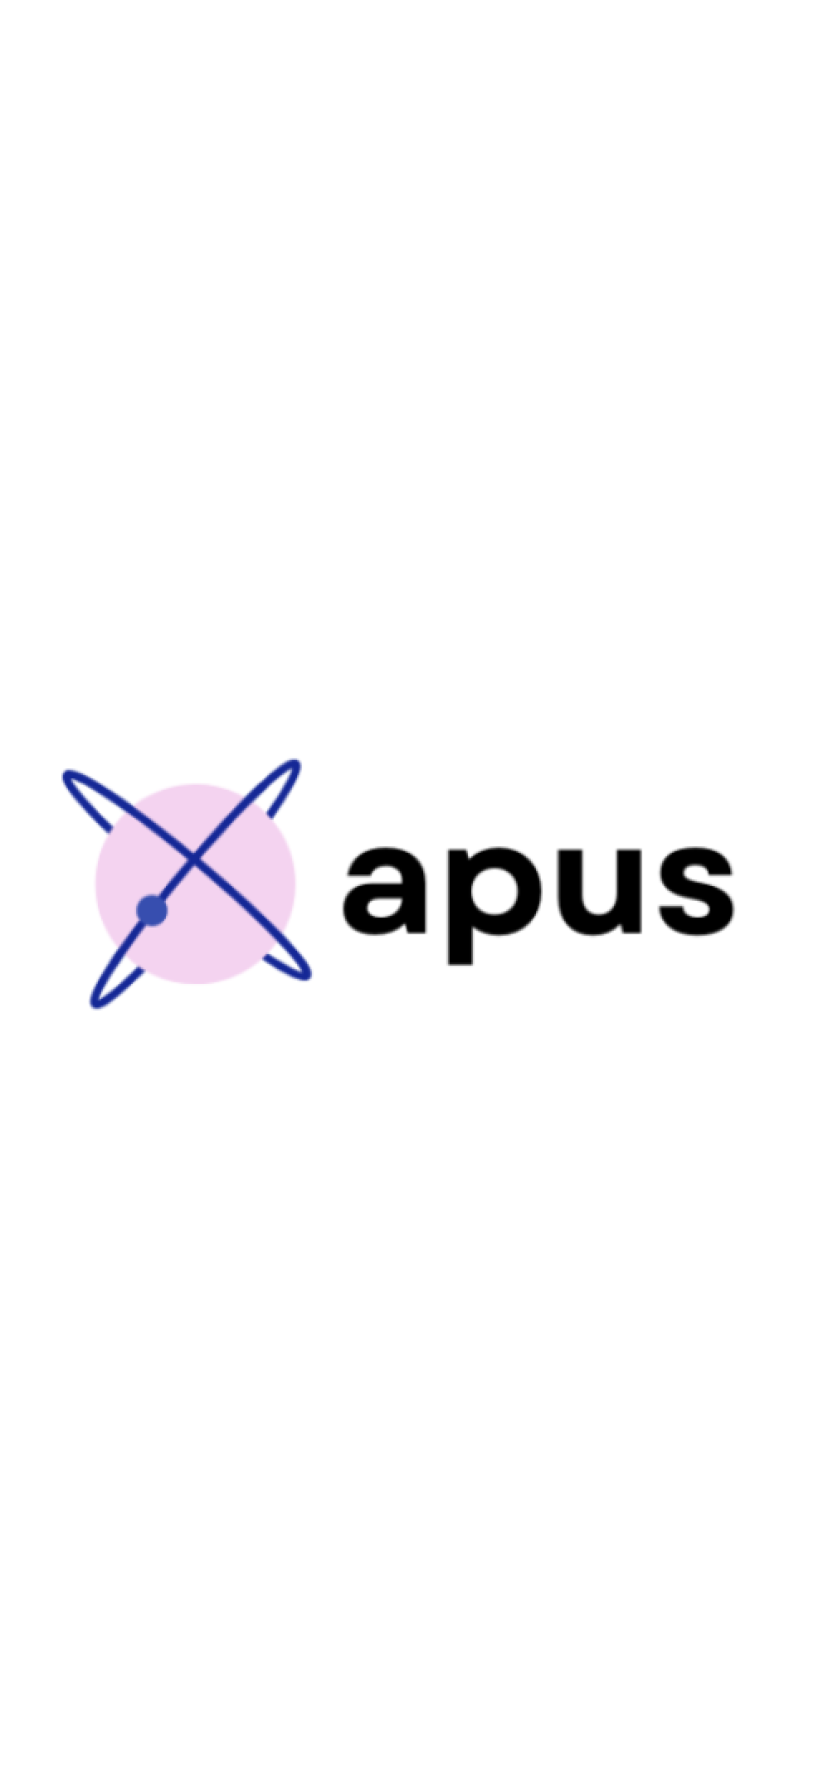 Apus.co domain name for sale